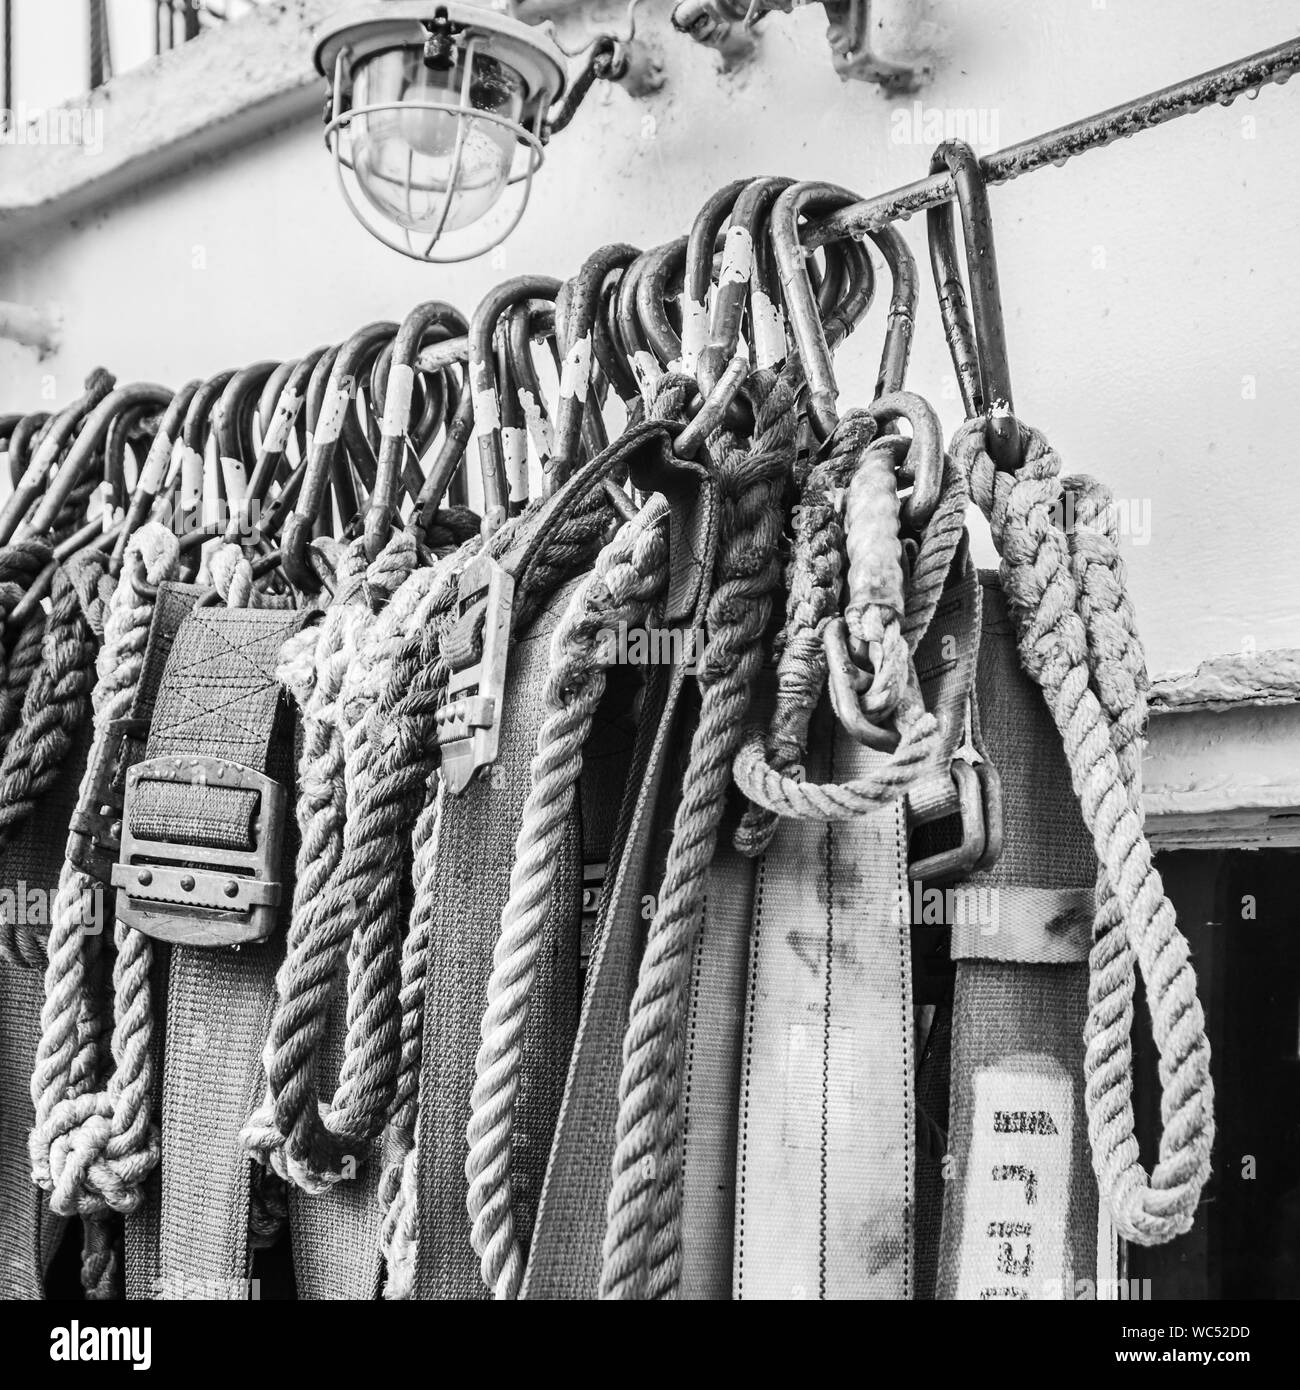 Safety belts on a sailboat, close-up. Black and white photo Stock Photo